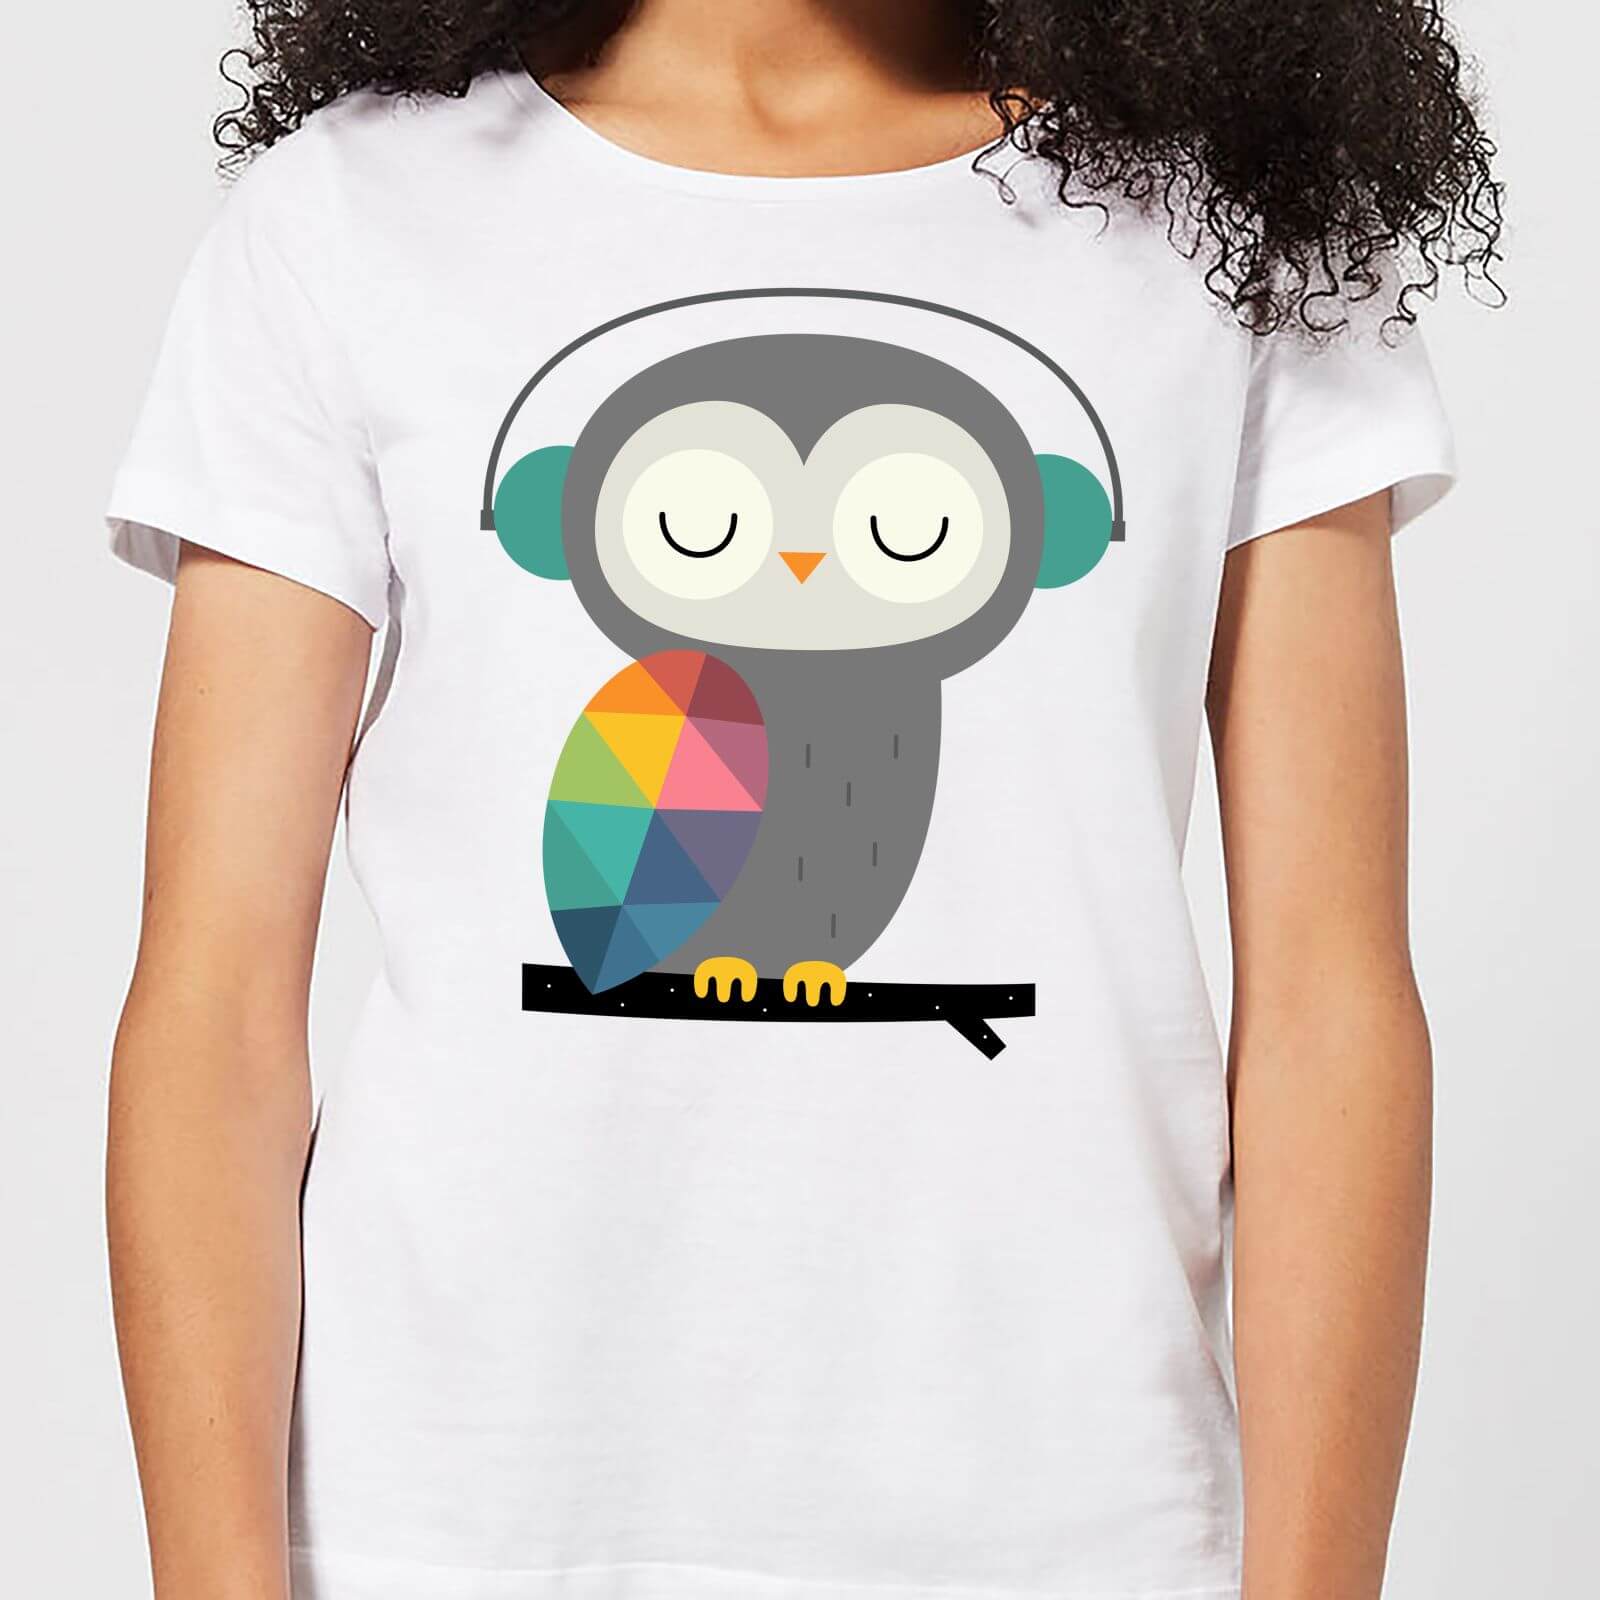 Andy Westface Owl Time Women's T-Shirt - White - S - White